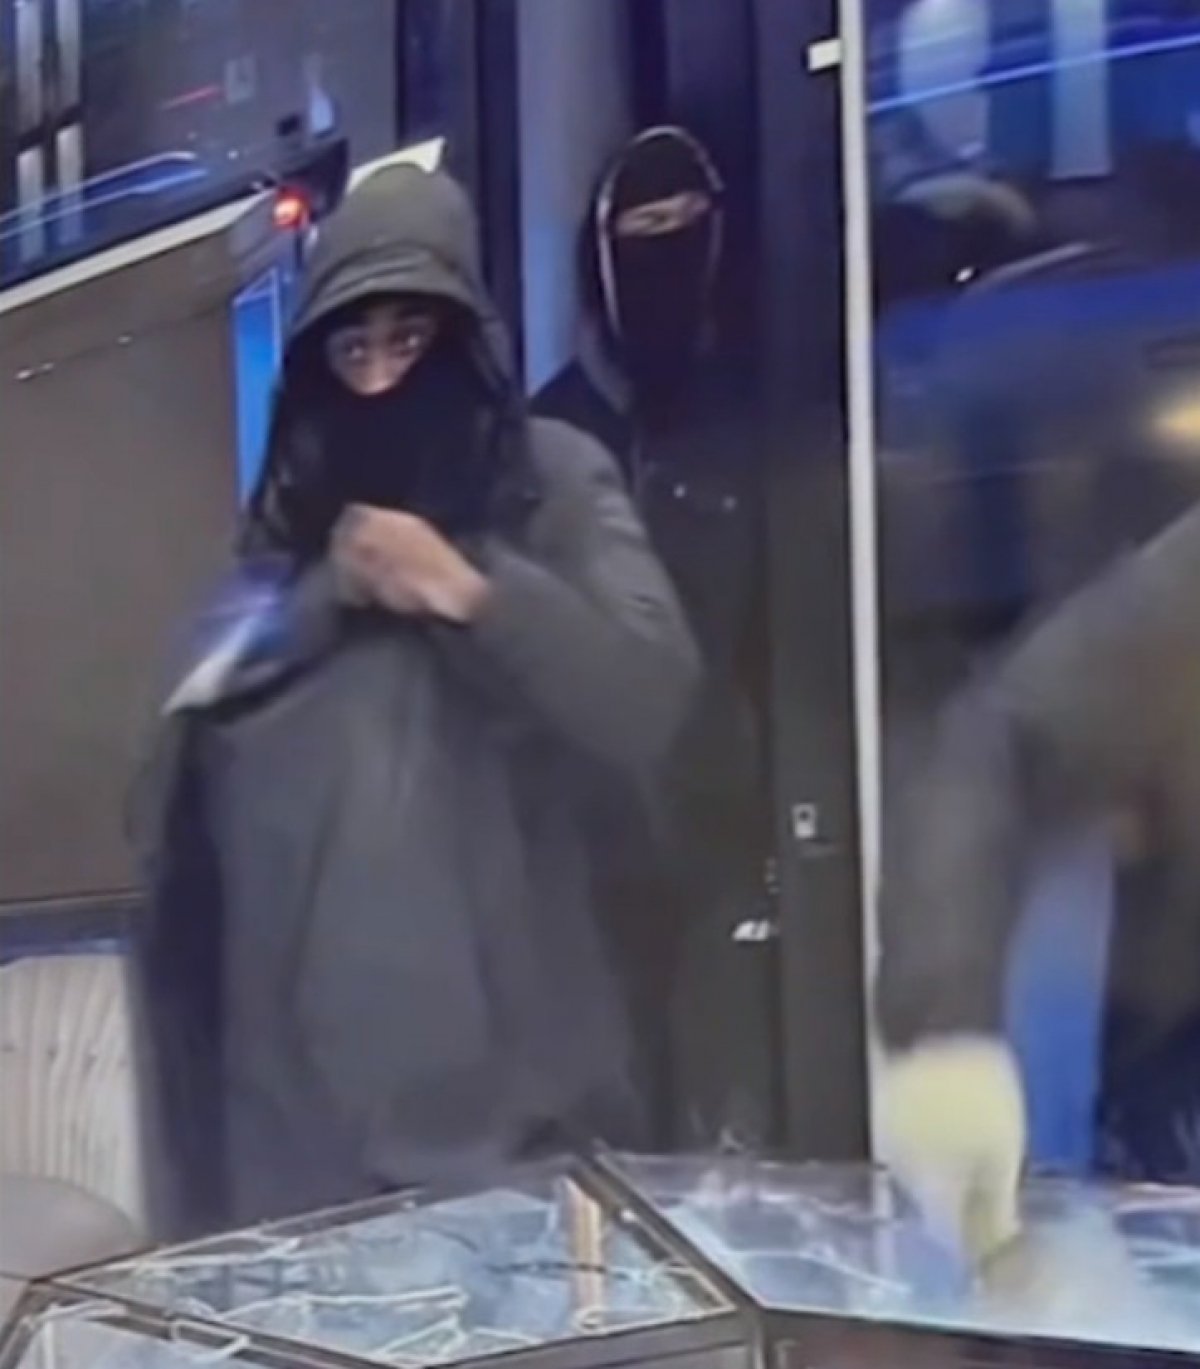 3 suspects wanted after stealing $2 million in jewelry during heist in Brooklyn